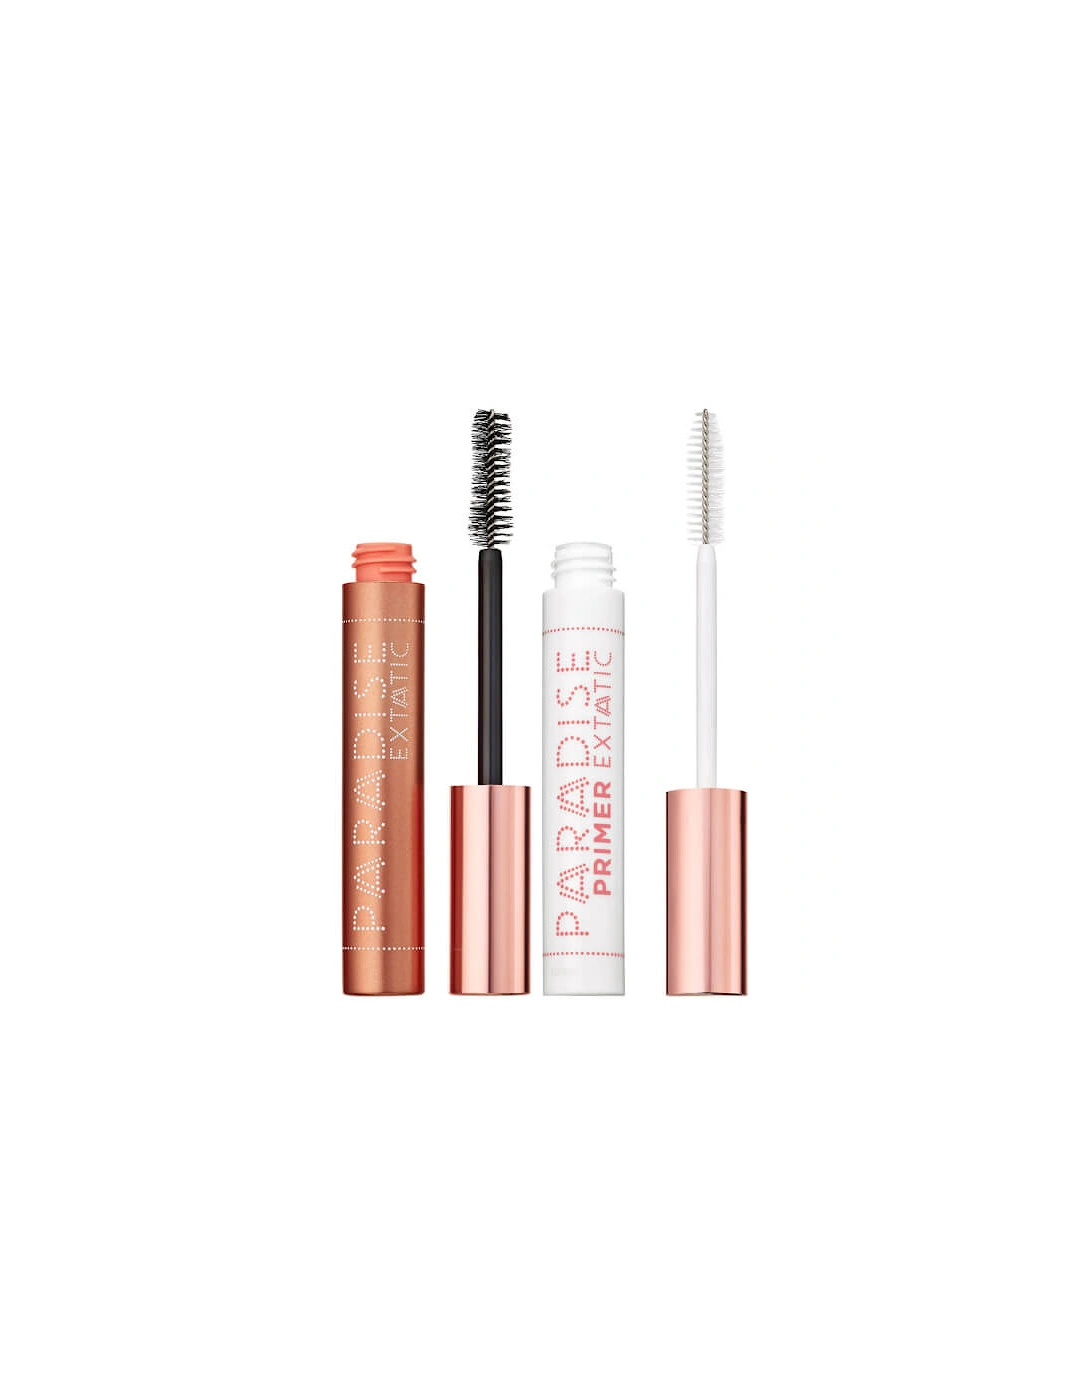 Paris Castor Oil-Enriched Paradise Volumising Mascara and Primer Exclusive (Worth £23.98), 2 of 1